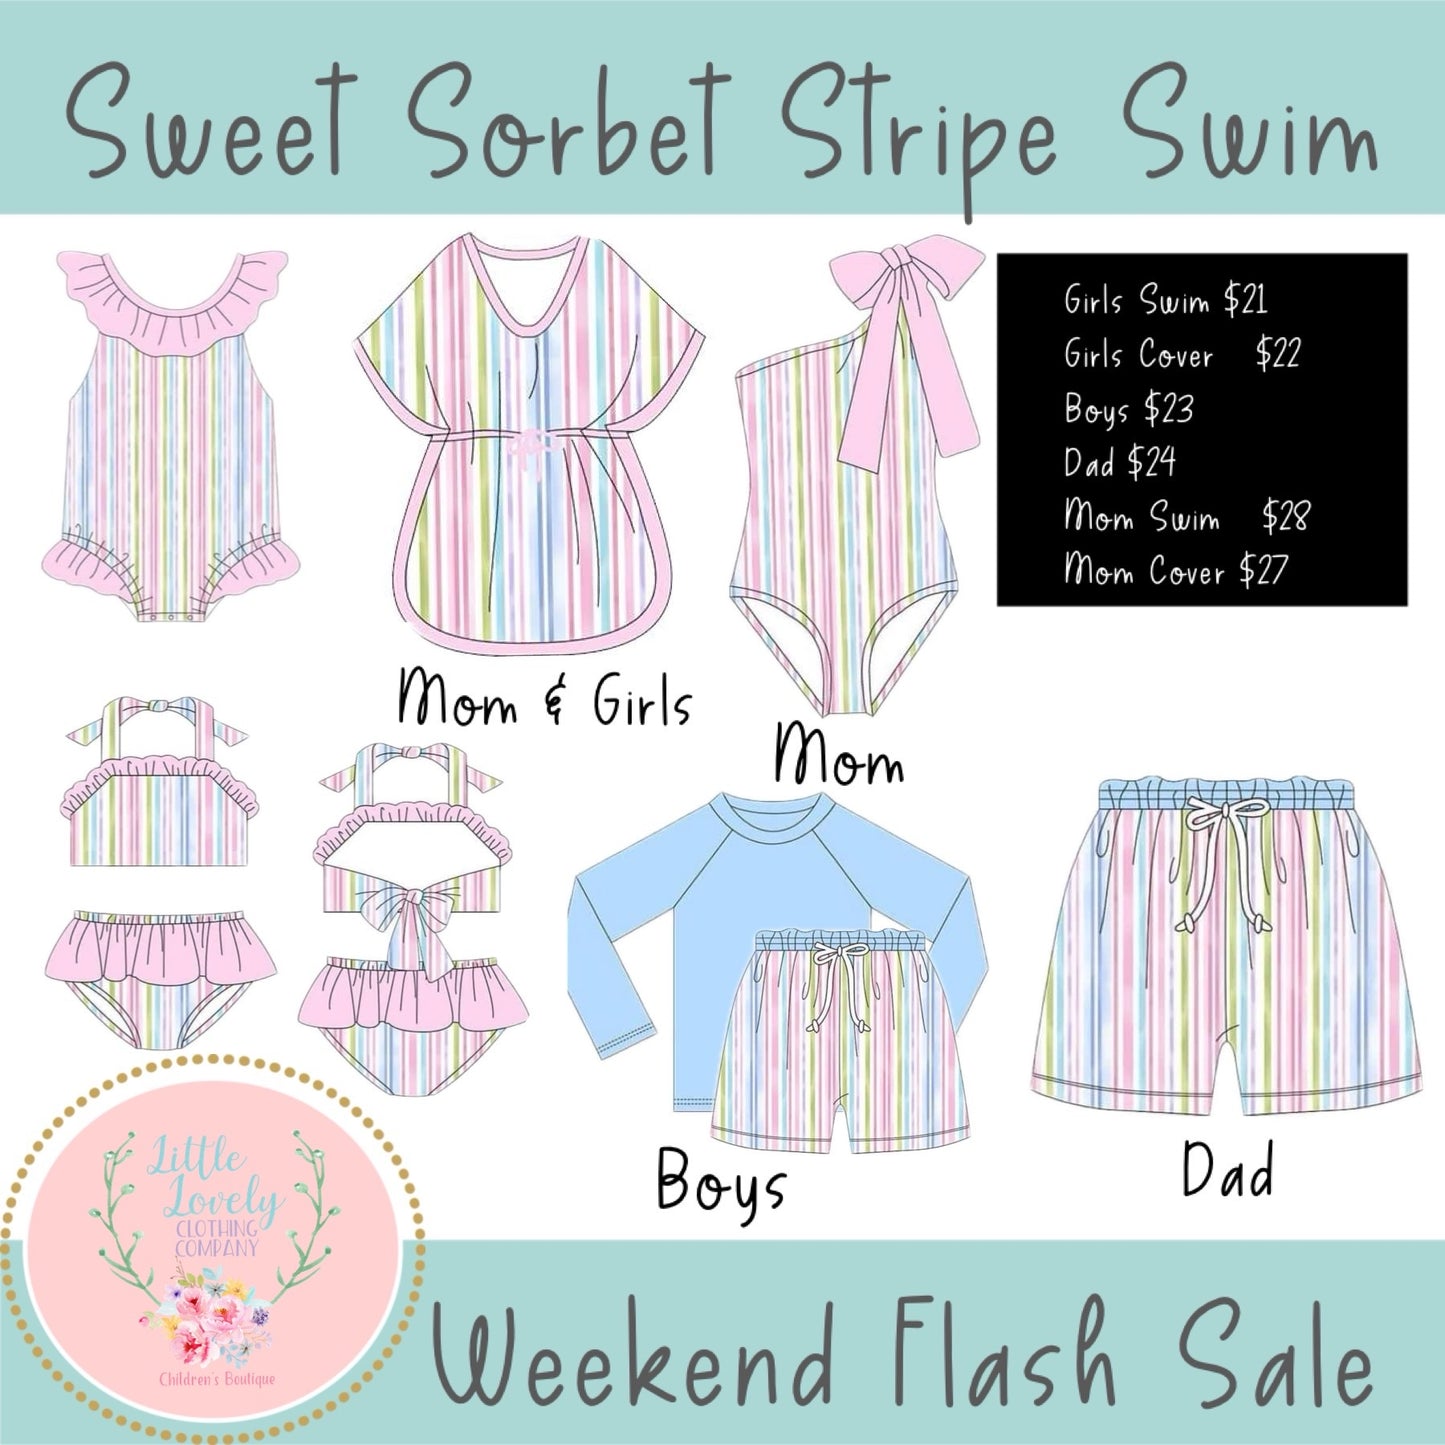 Sorbet Stripe Swim Collection (ADULT STYLES), Presale ETA: May to LLCCO, then to customers